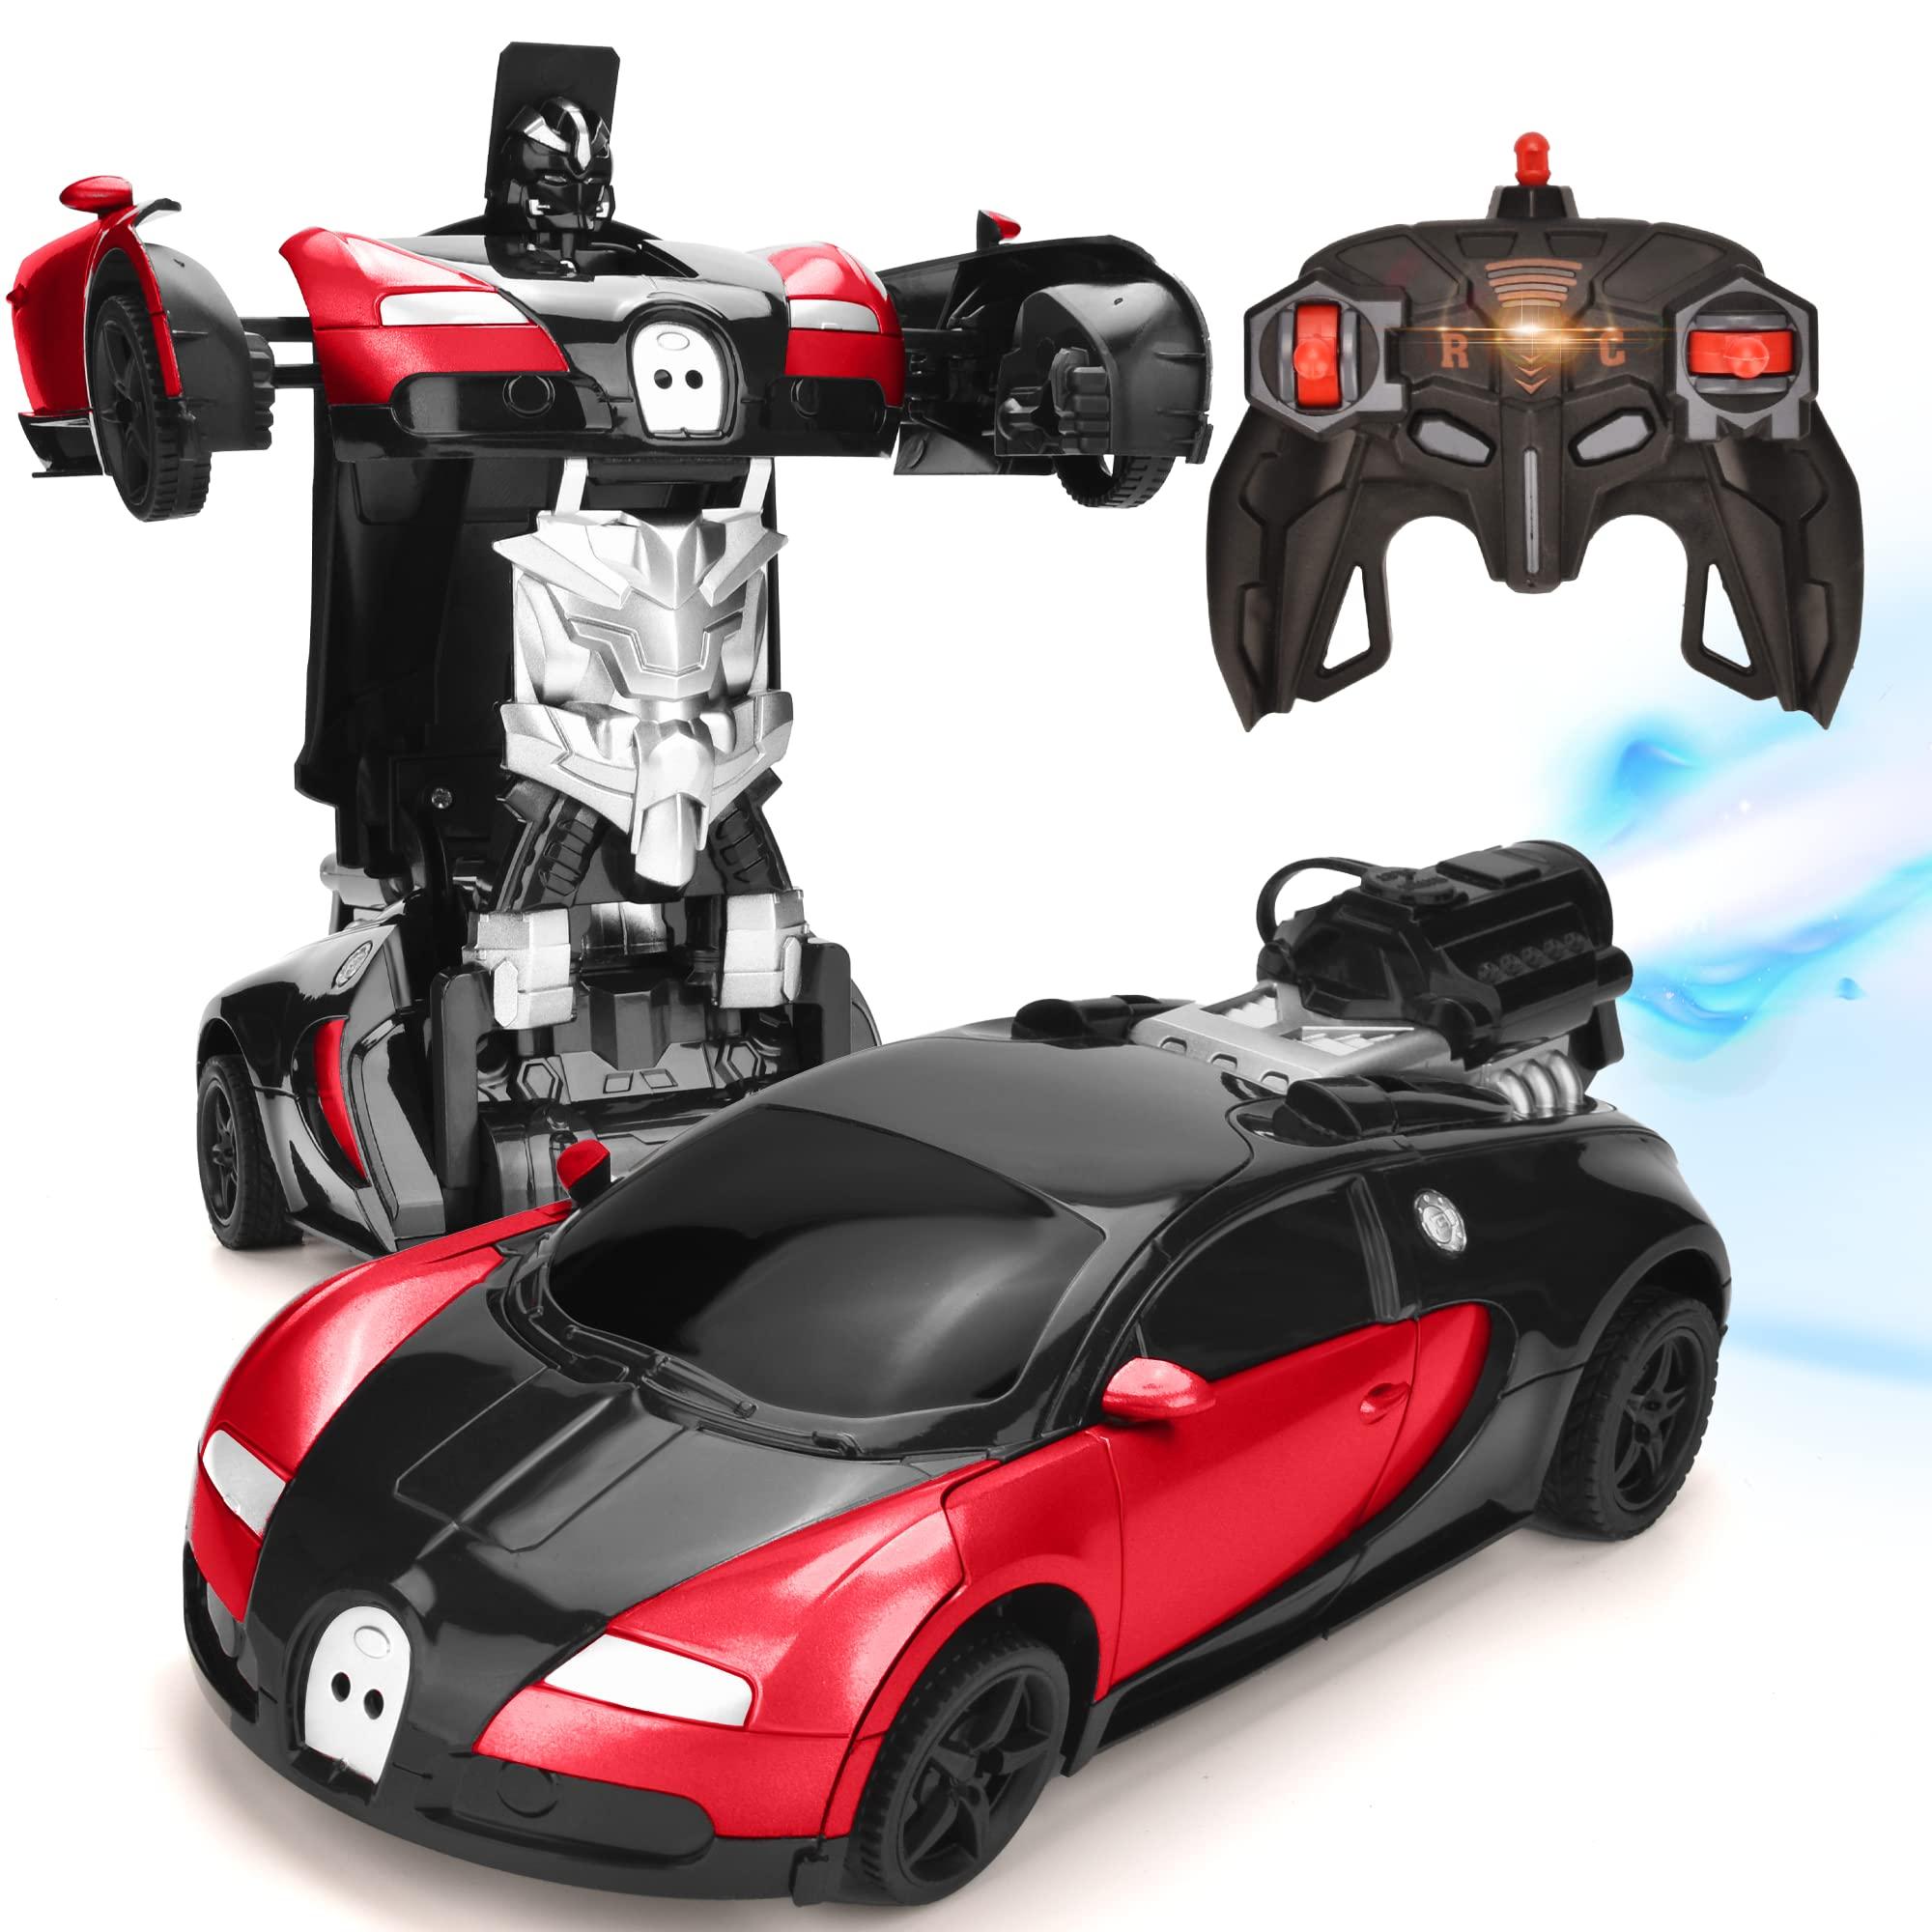 Robot Car Toy With Remote Control: Get the best robot car toy with remote control for your child!